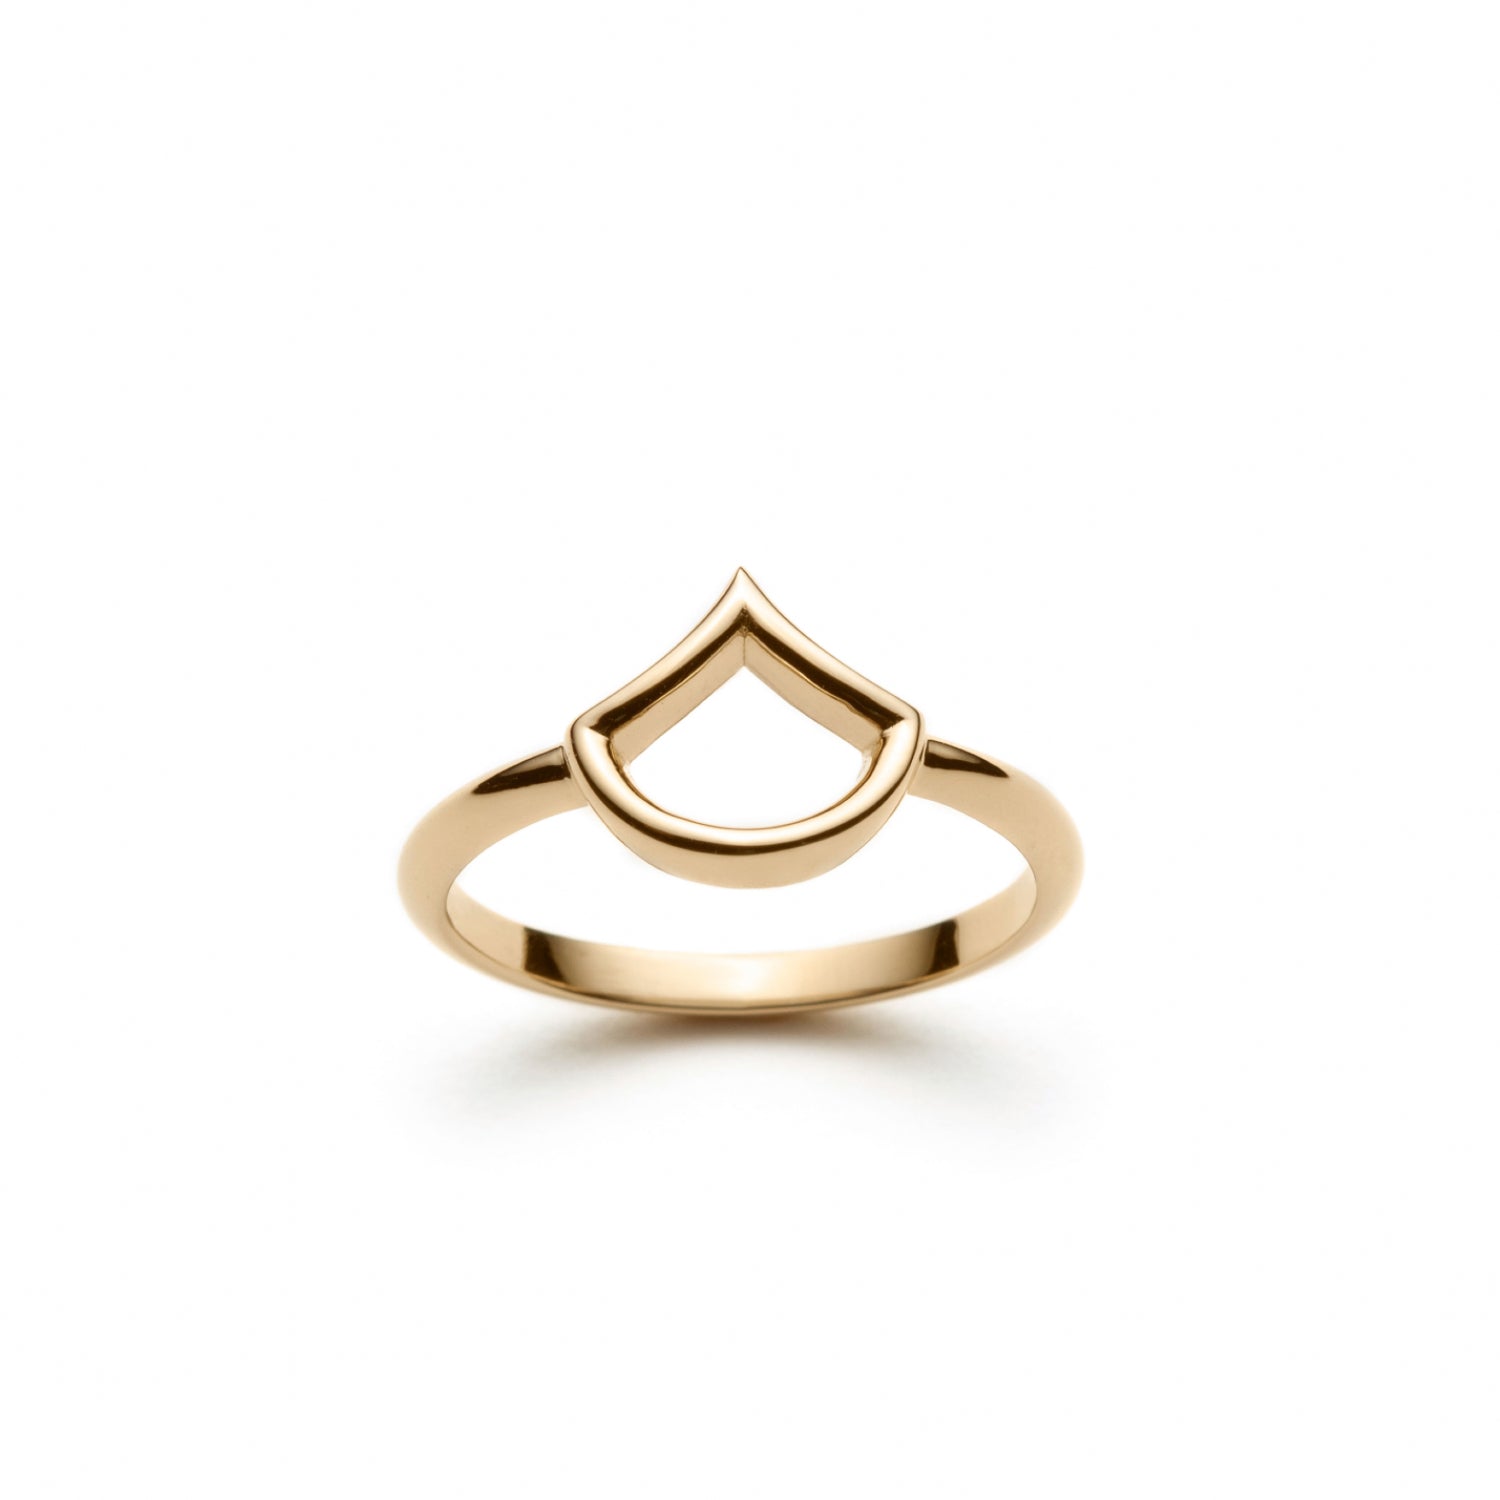 Lepi Mermaid Scale Motif Ring in Yellow Gold